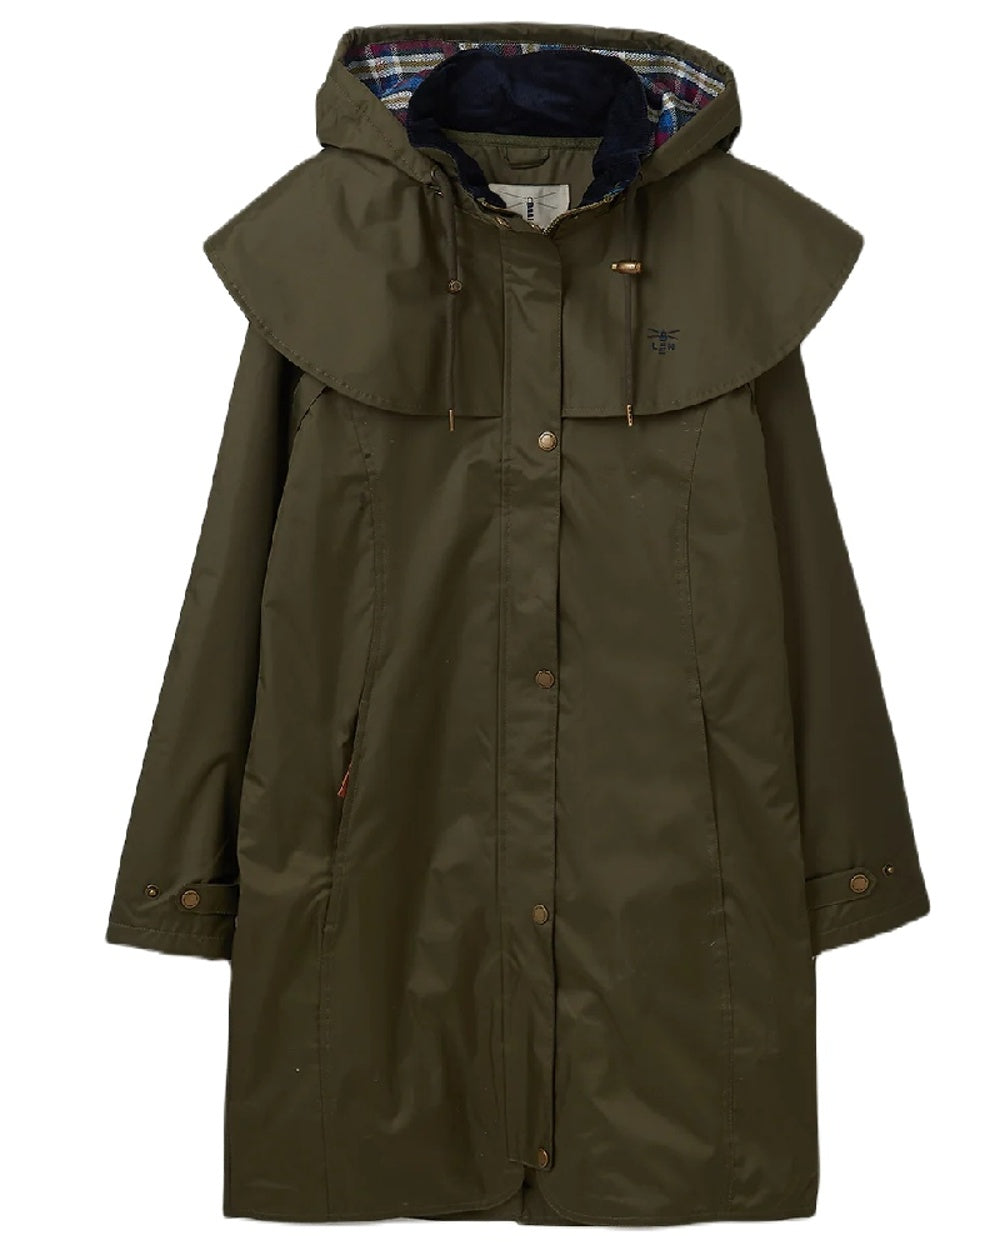 Lighthouse Outrider 3/4 Length Ladies Waterproof Raincoat in Fern 